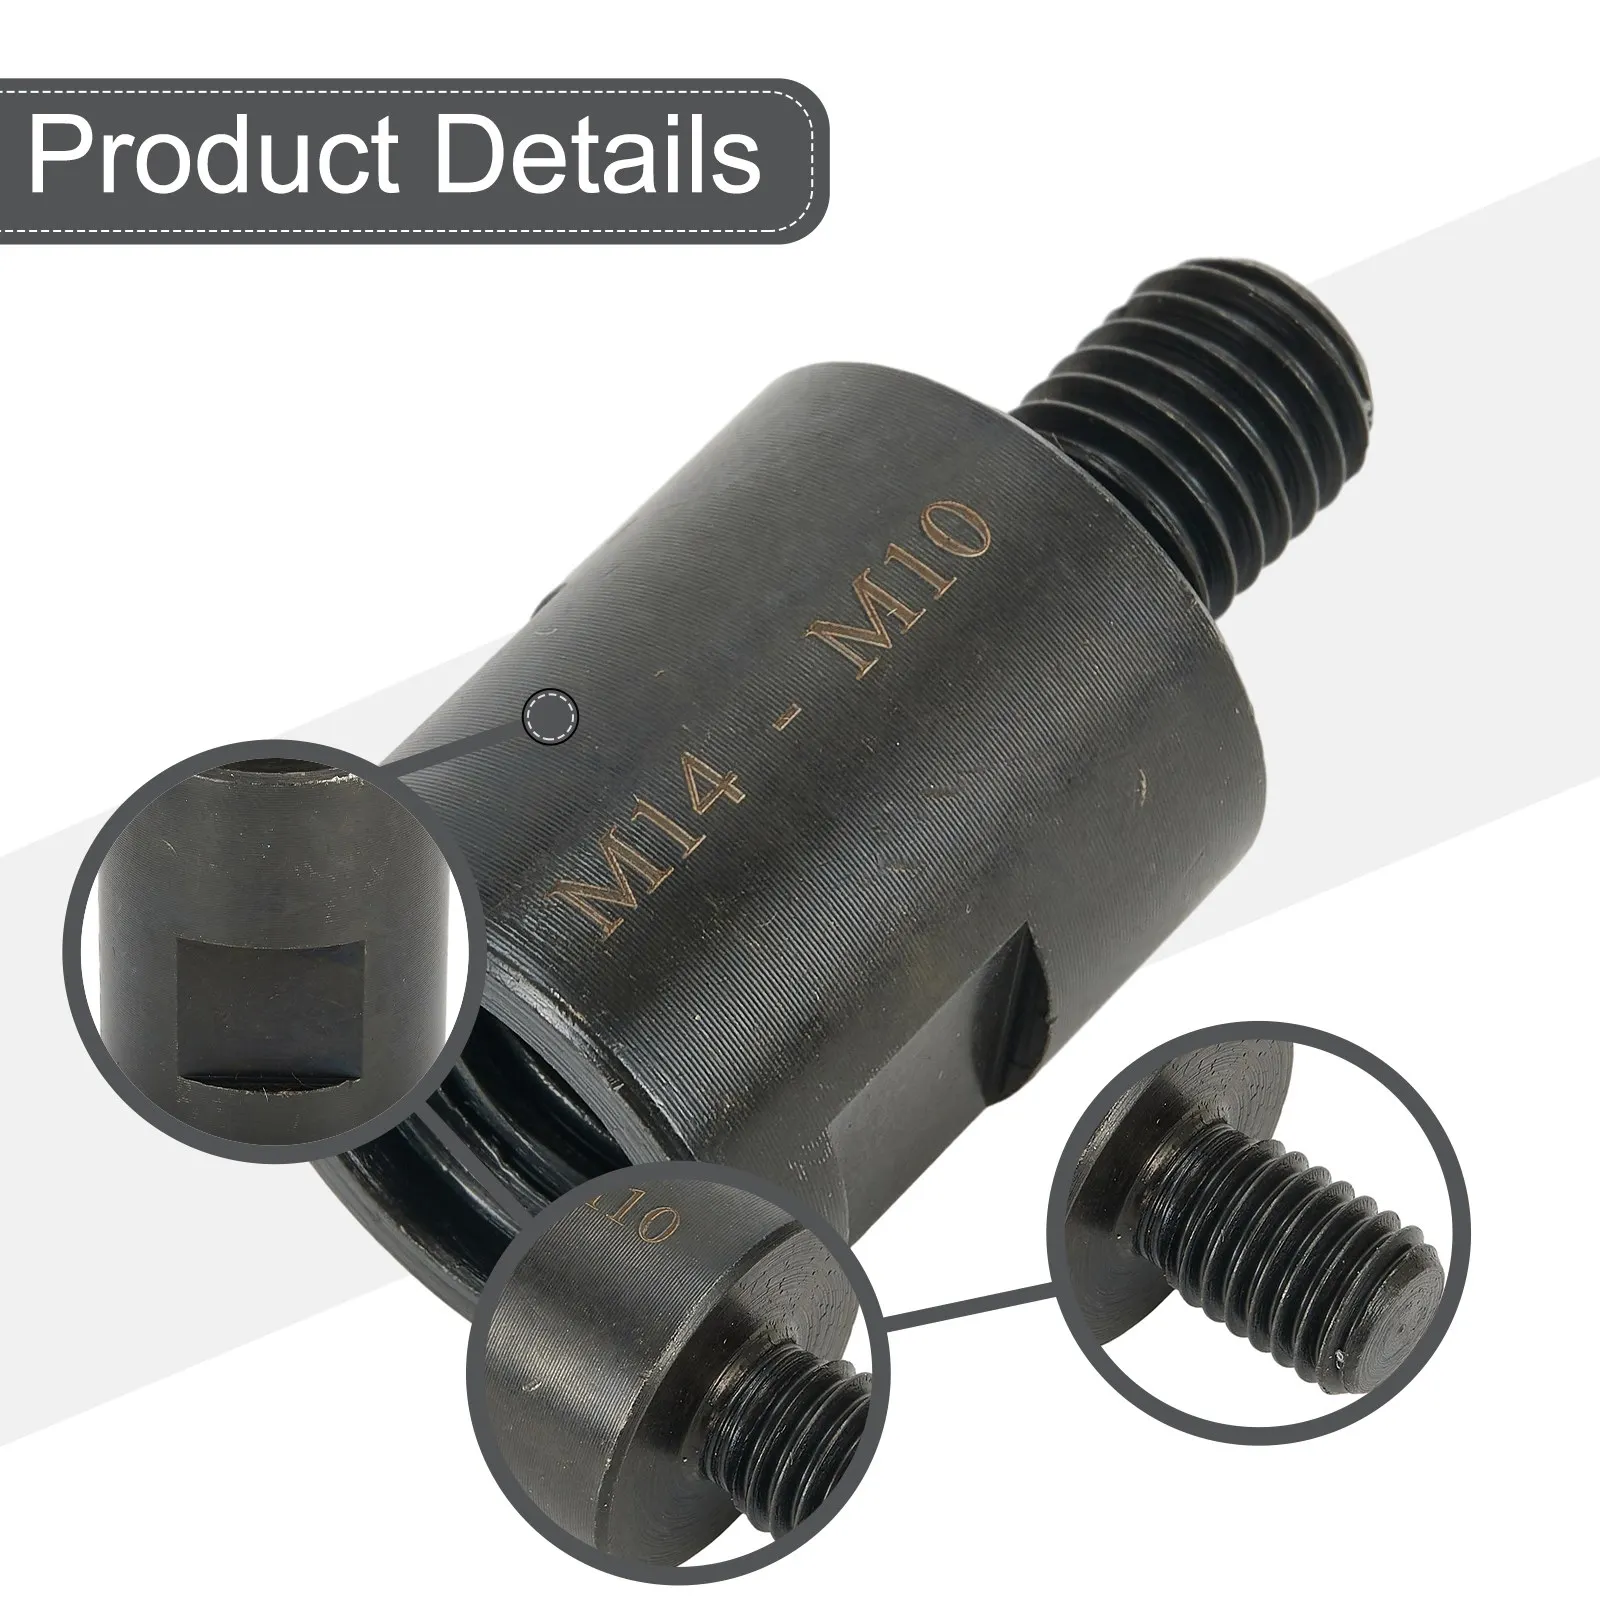 Angle Grinder Adapter Converter M10 M14 5/8-11 Suitable For Polishing Pads Backer Plate, Drill Bits Polishing Machine